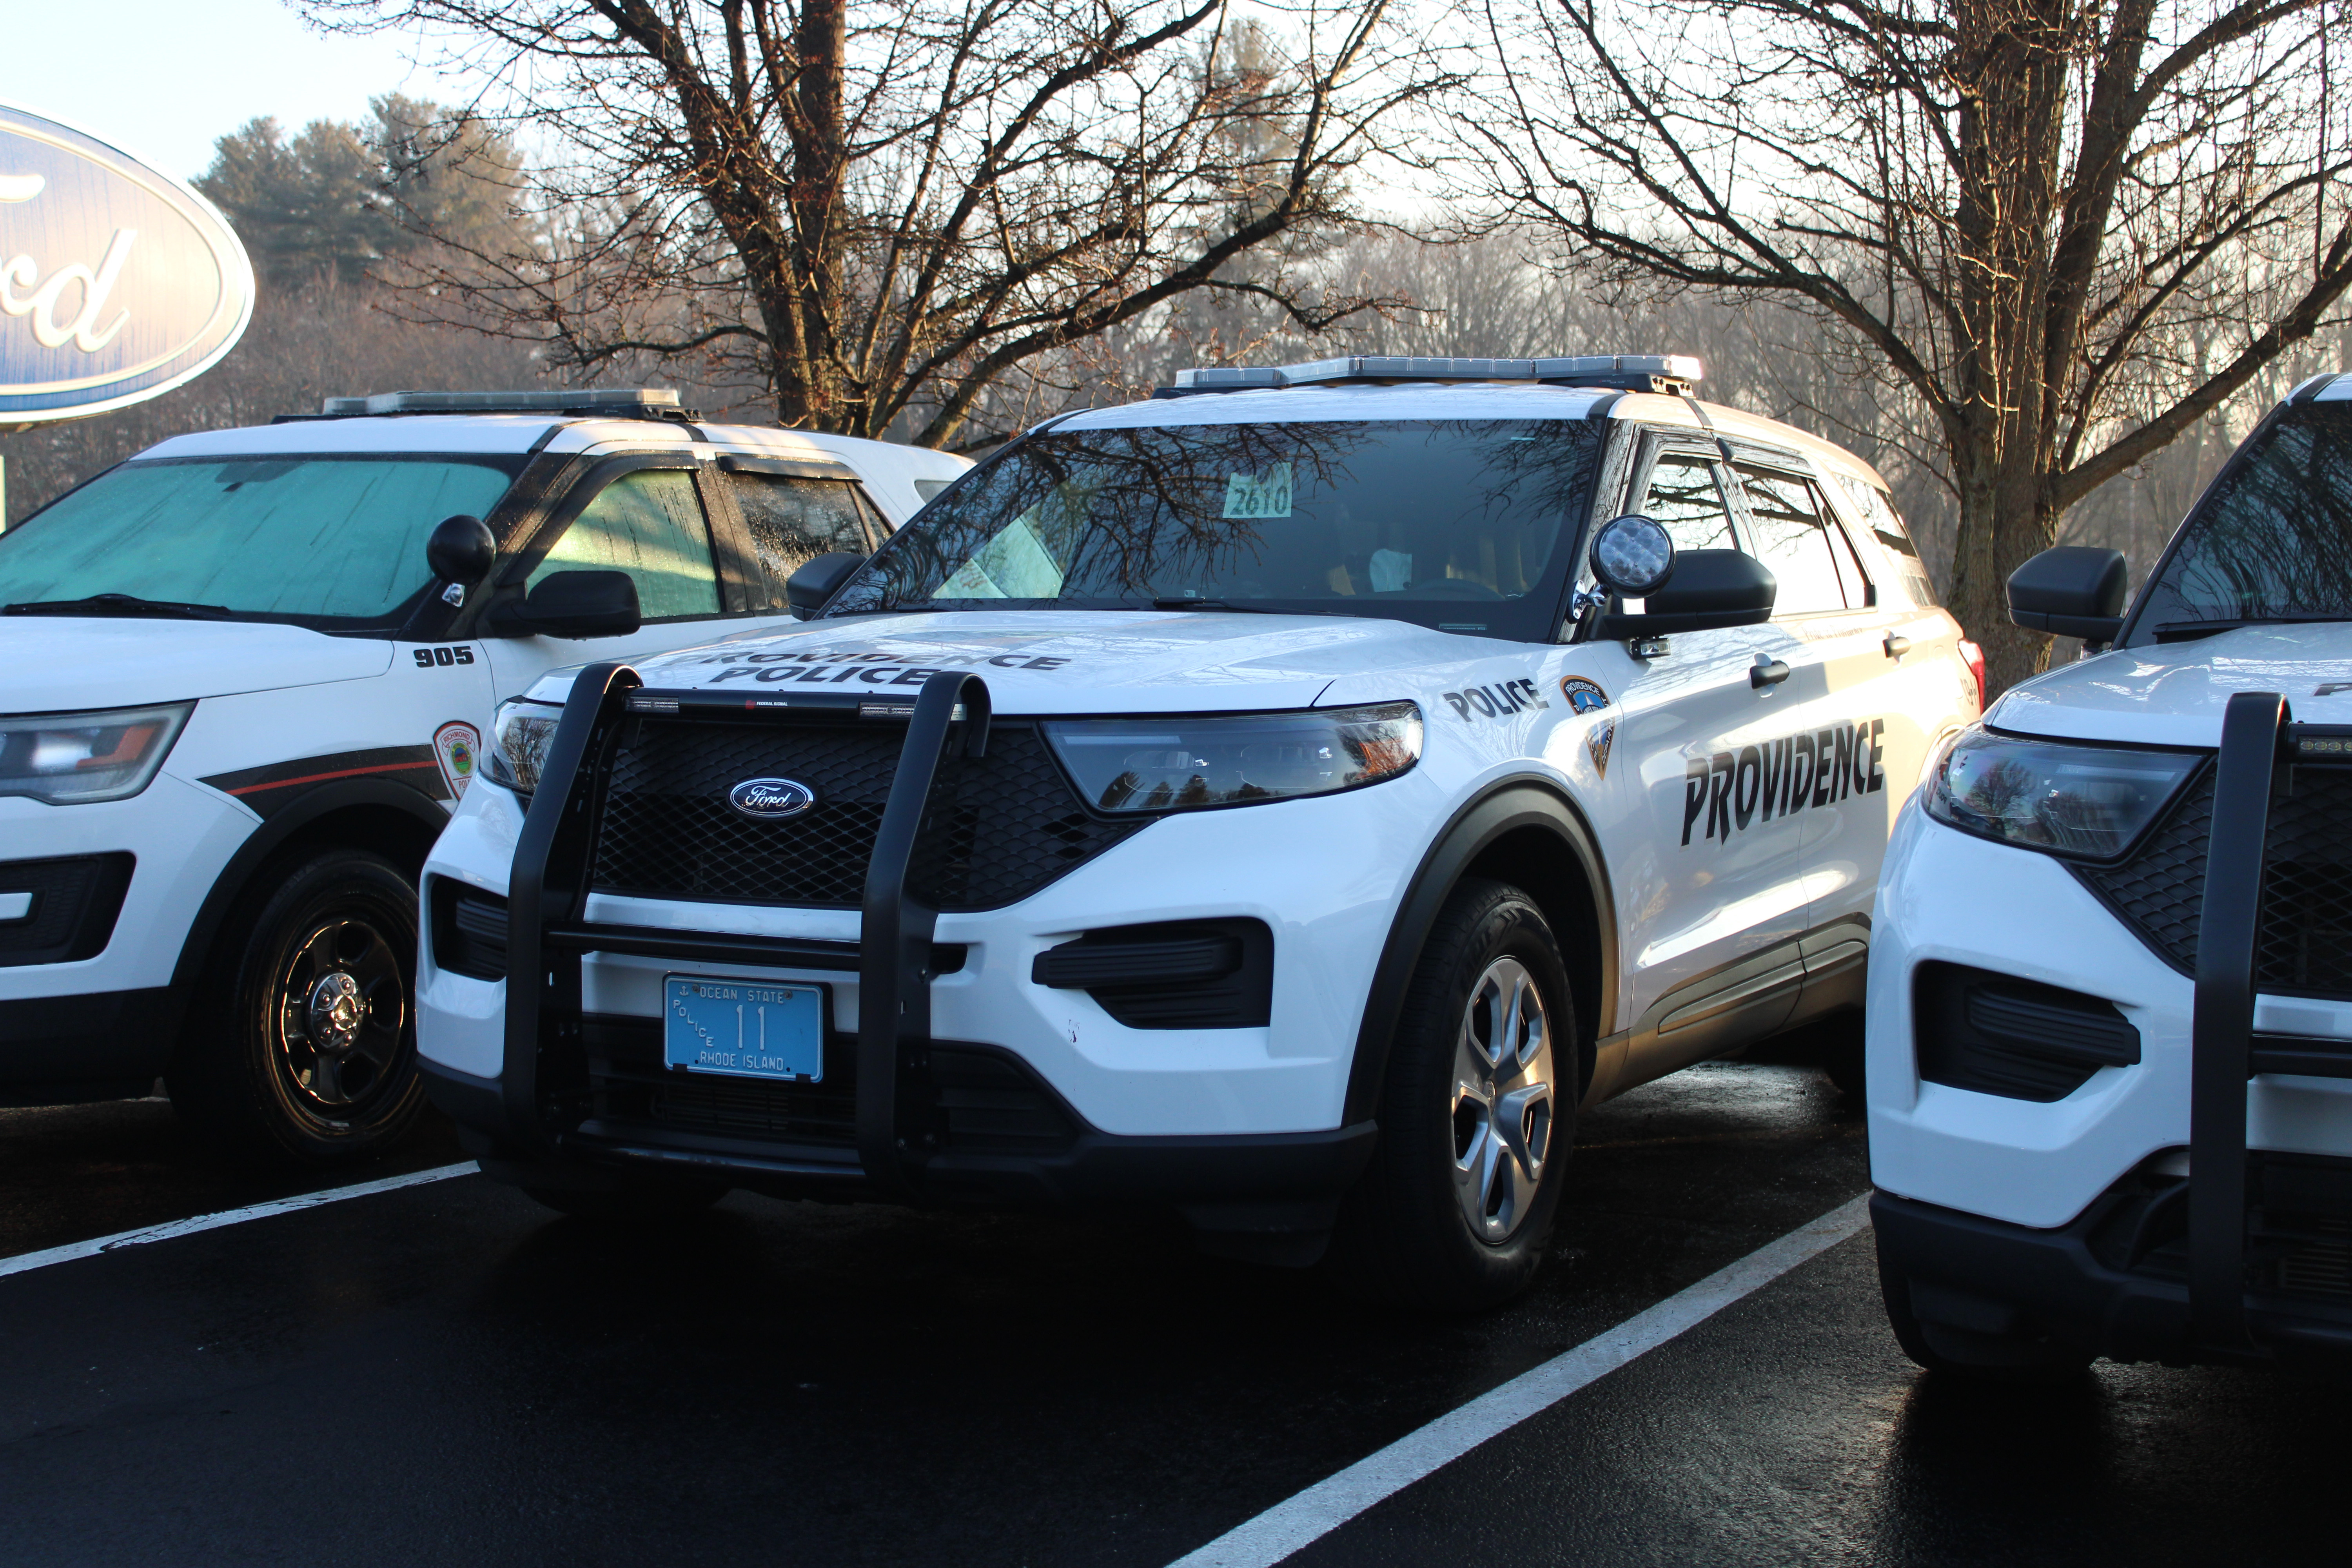 A photo  of Providence Police
            Cruiser 11, a 2020 Ford Police Interceptor Utility             taken by @riemergencyvehicles